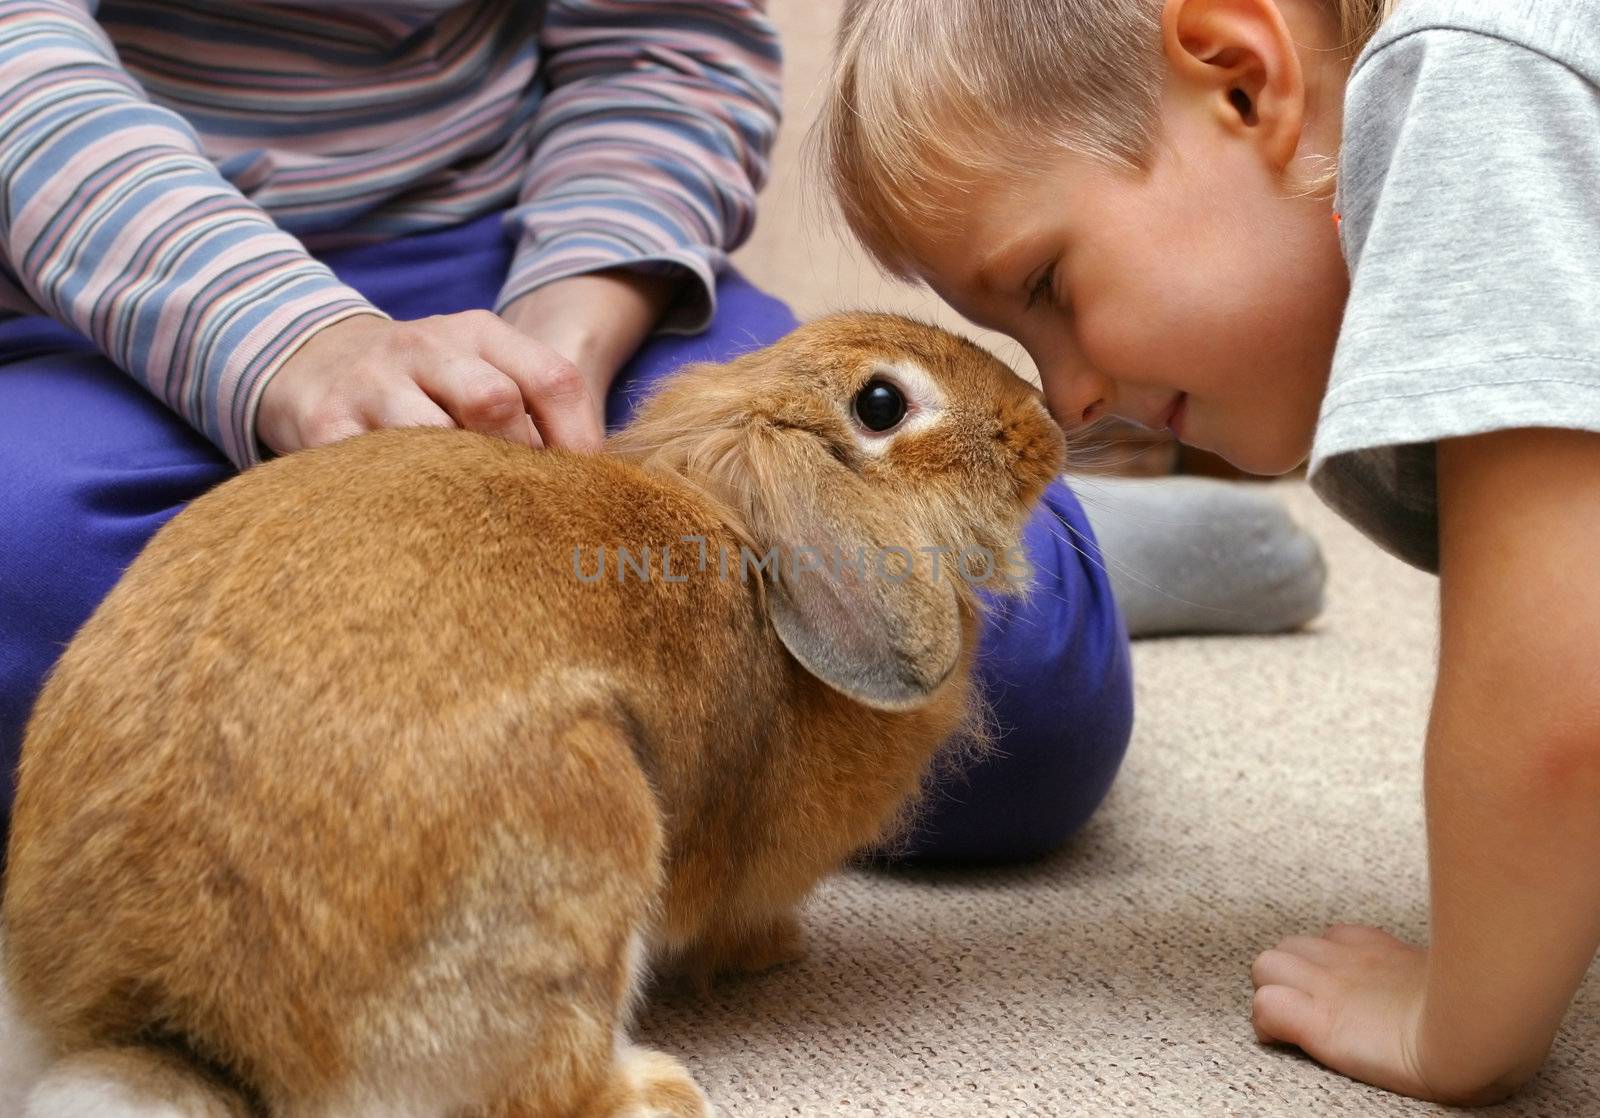 The boy plays with the rabbit